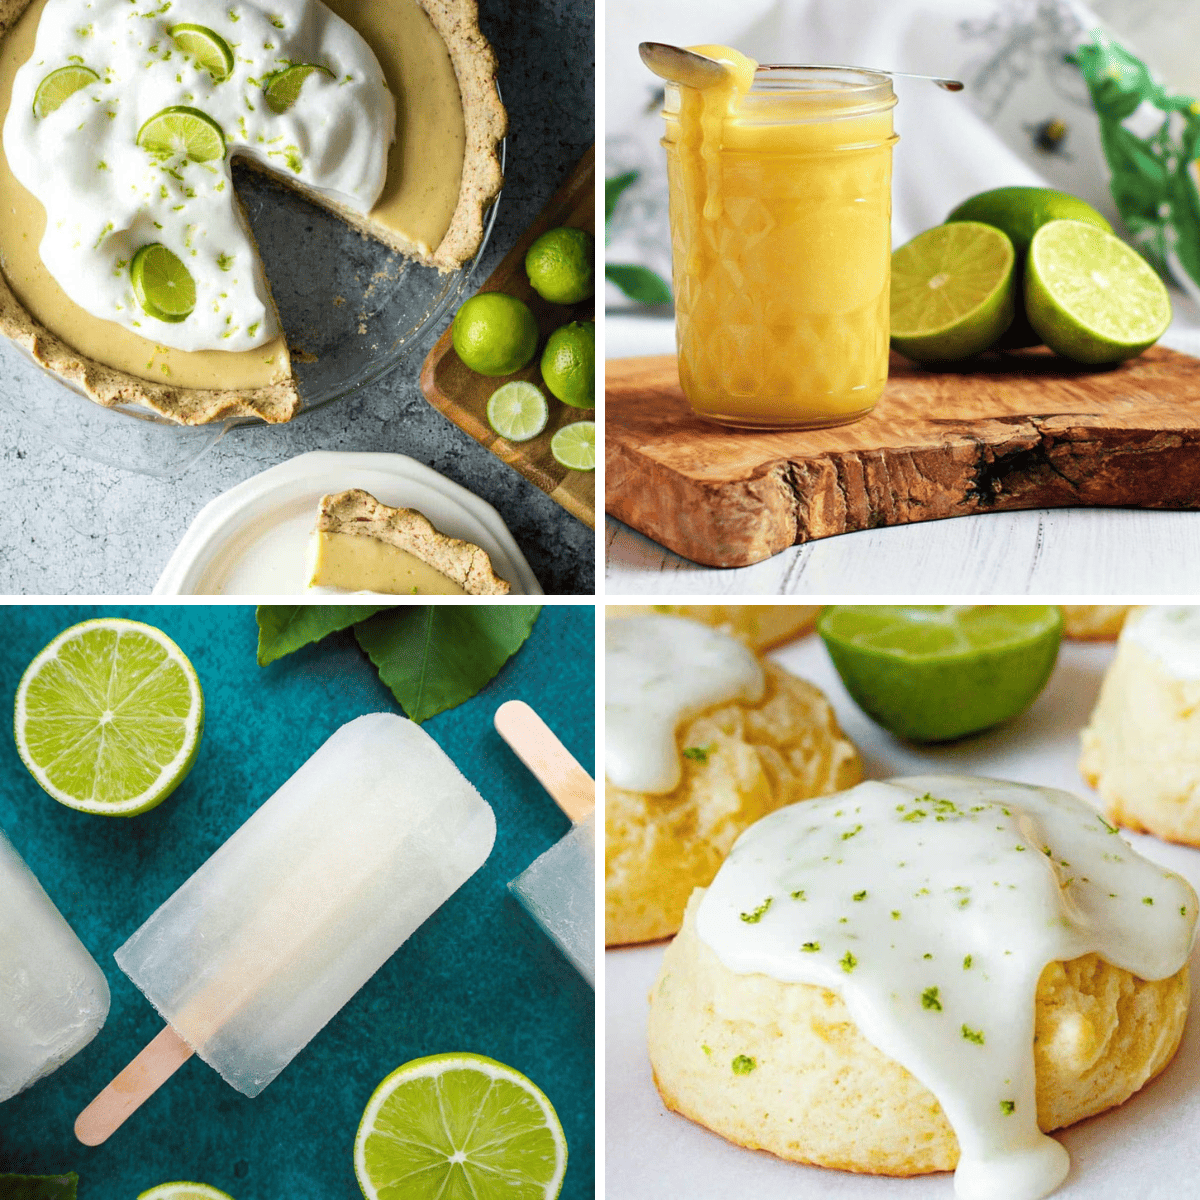 Lime Desserts featured images.